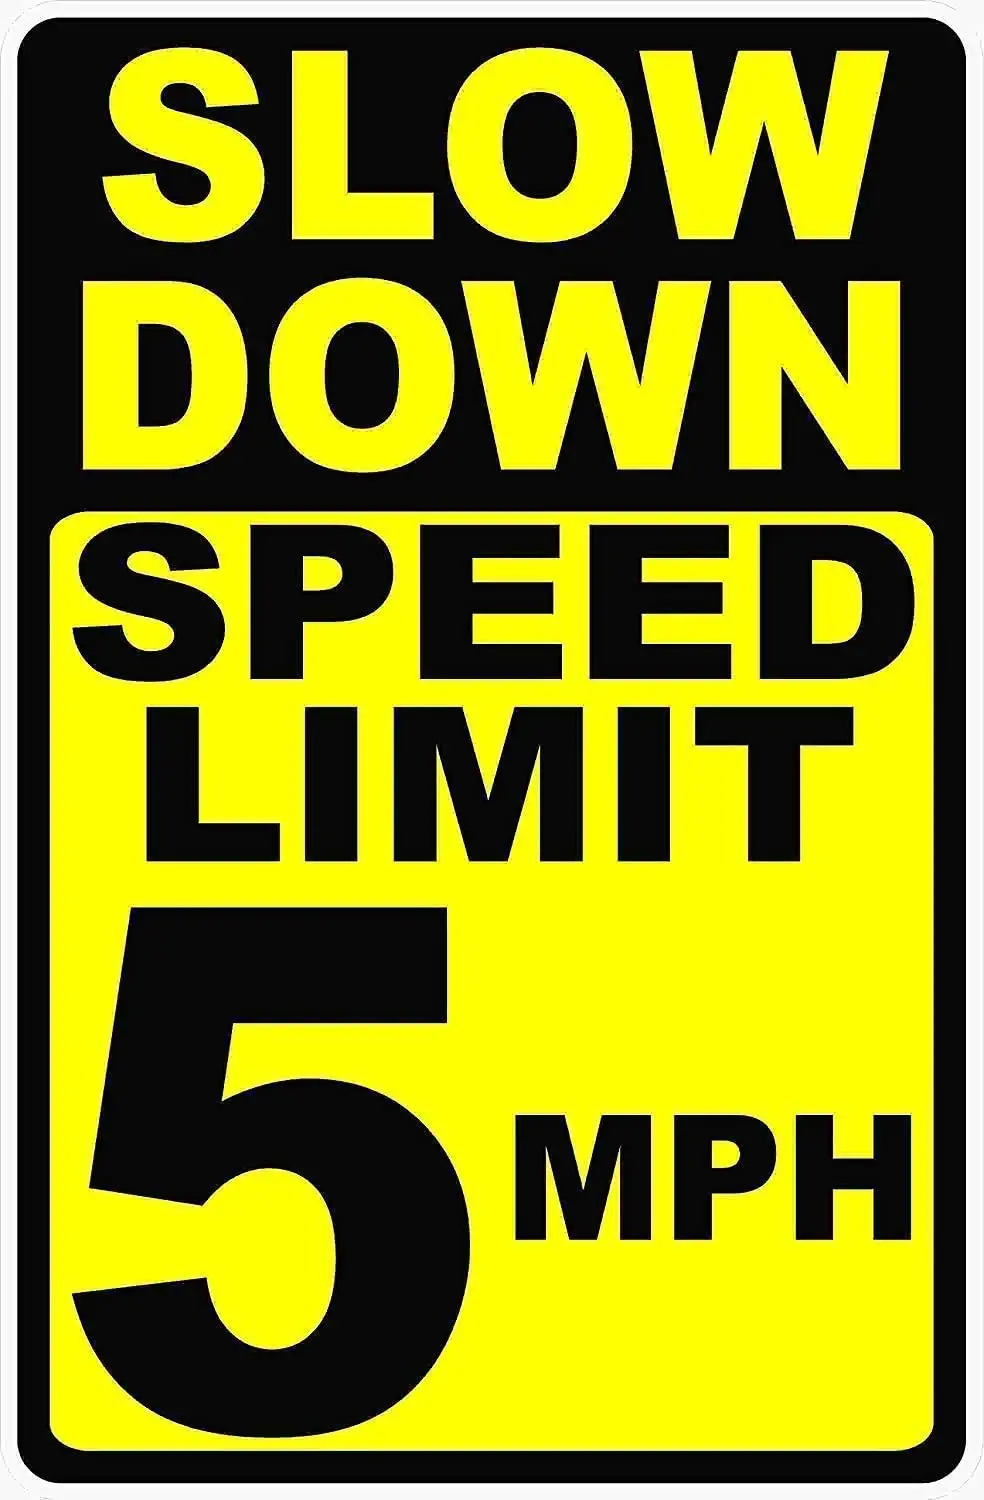 

Slow Down Speed Limit 5 Mph Prevent Speeding Retro Metal Tin Sign Plaque Poster Wall Decor Art Shabby Chic Gift